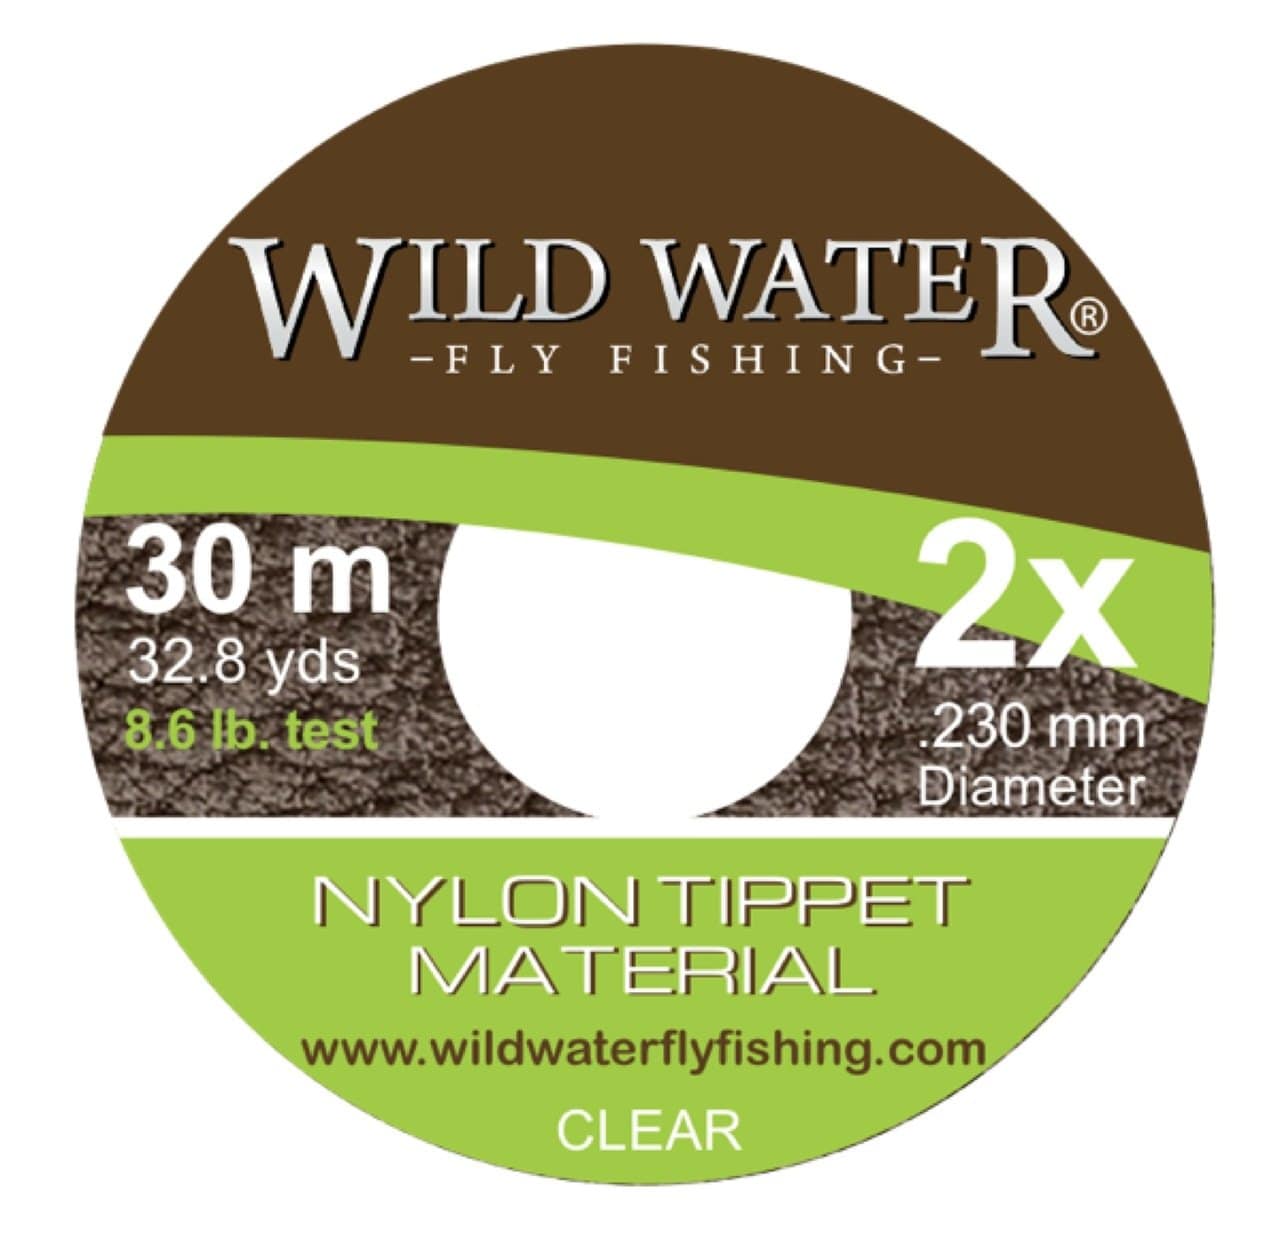 Wild Water Fly Fishing 2X Tippet